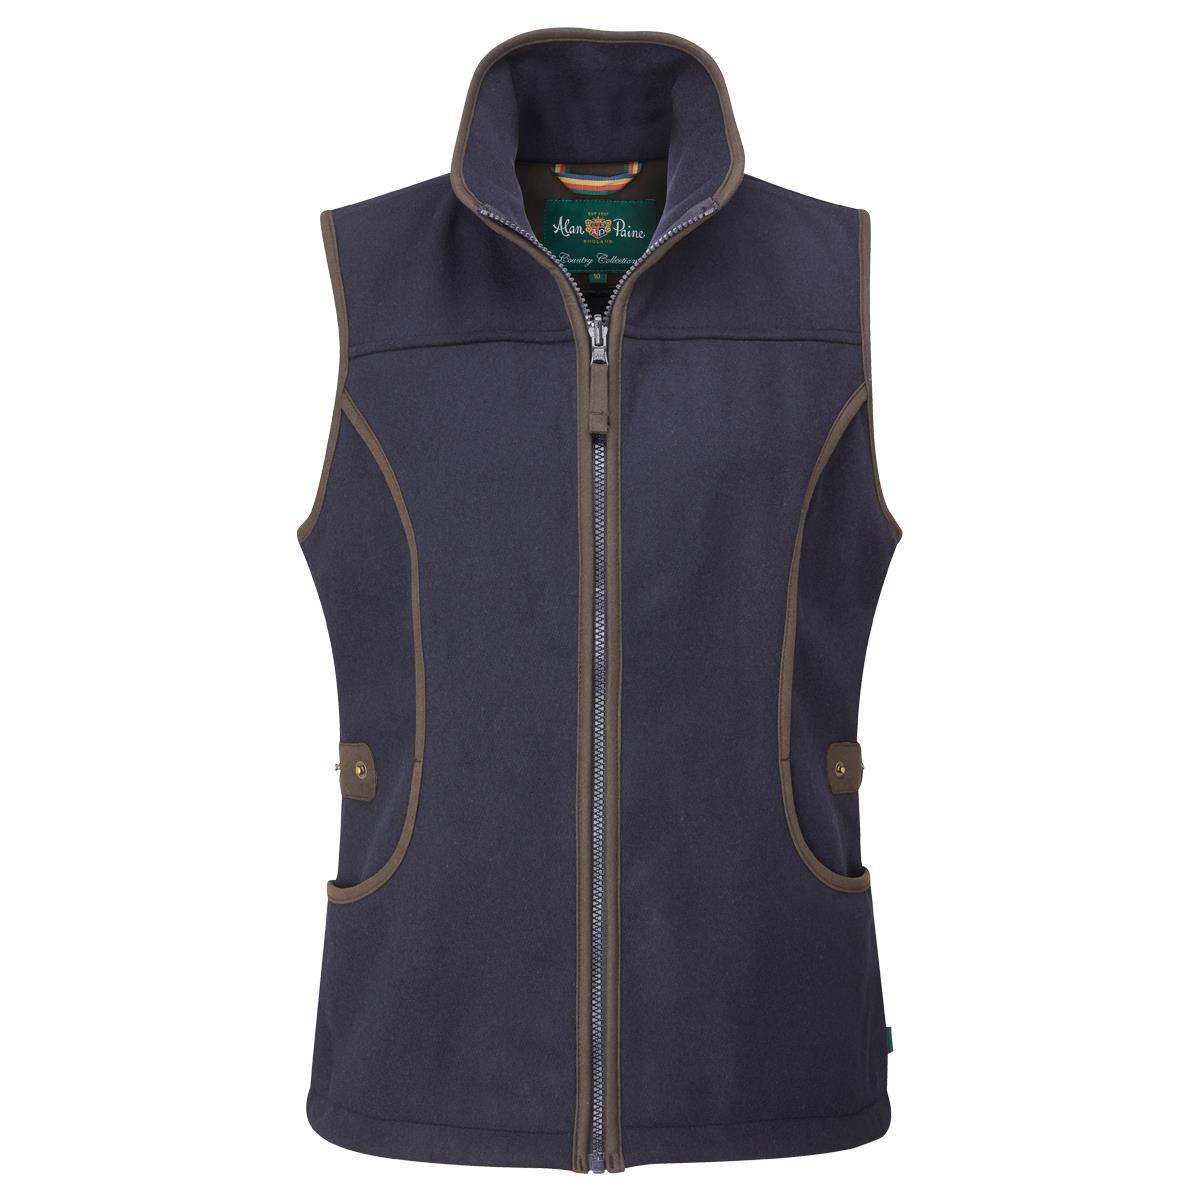 What is the length of the medium size in the Alan Paine Womens Berwick Waistcoat?